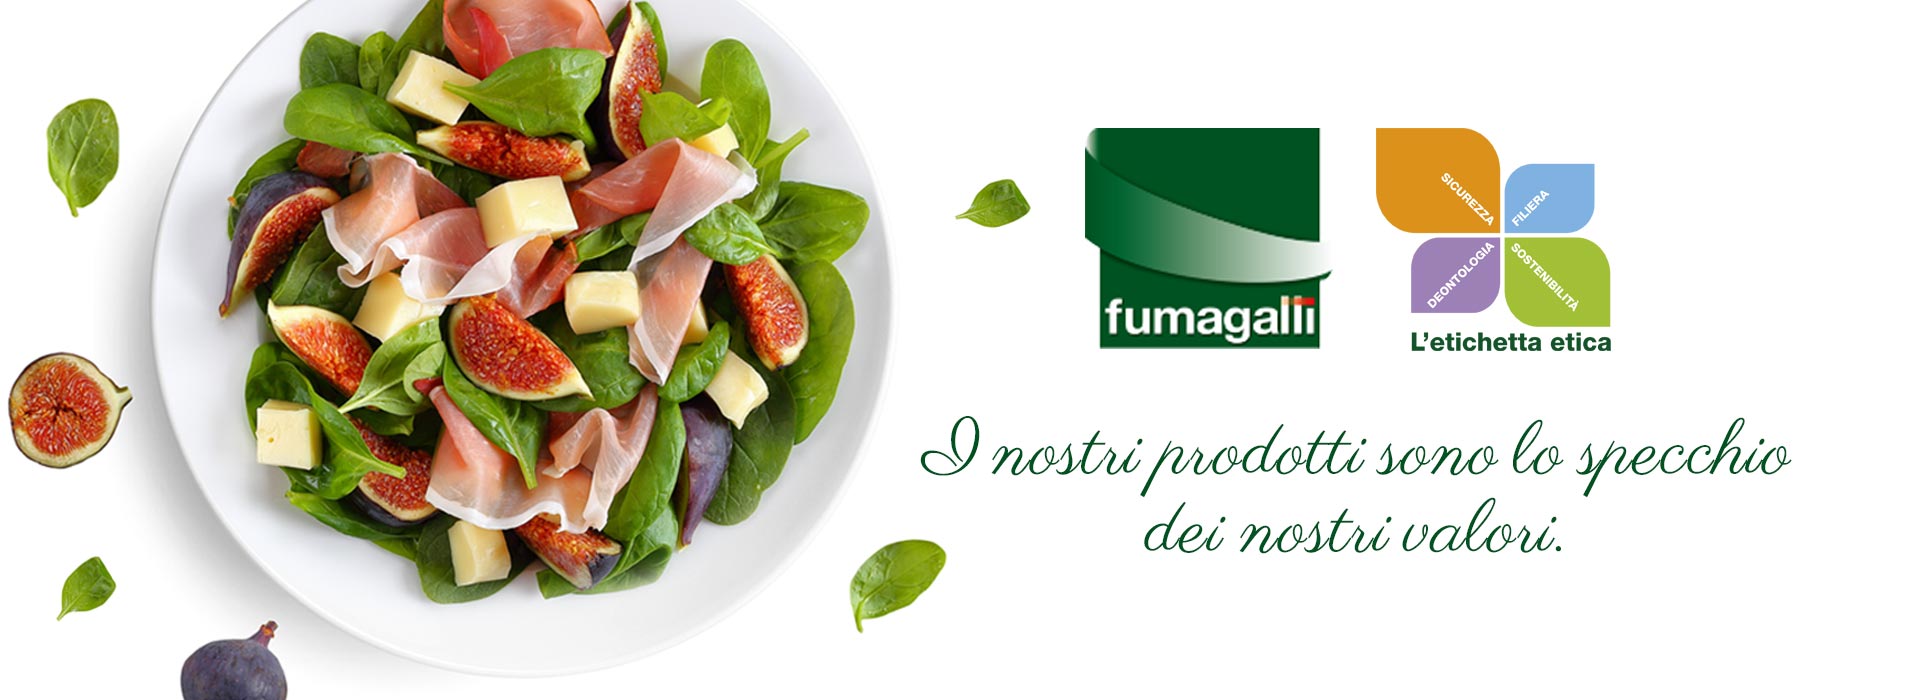 Fumagalli salumi’s ethical label. Family values. Our products reflect our values